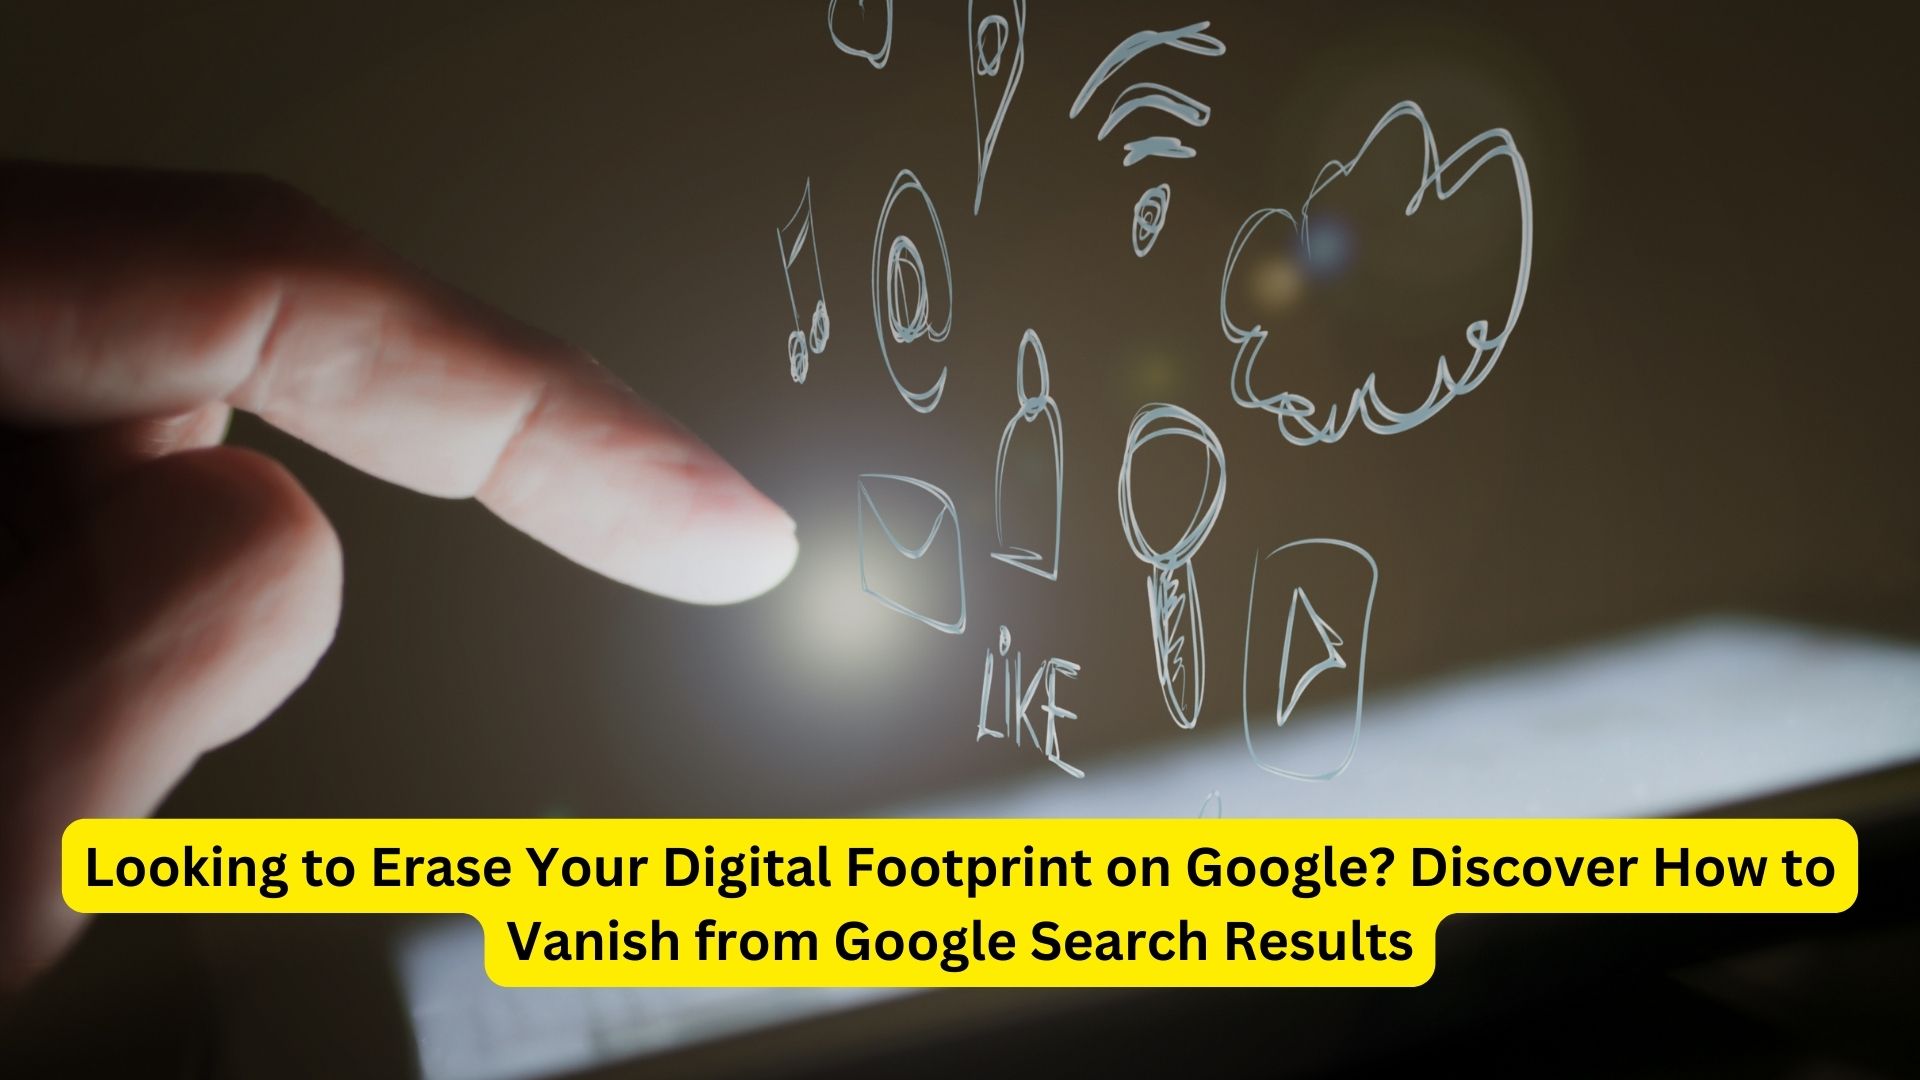 Looking to Erase Your Digital Footprint on Google? Discover How to Vanish from Google Search Results